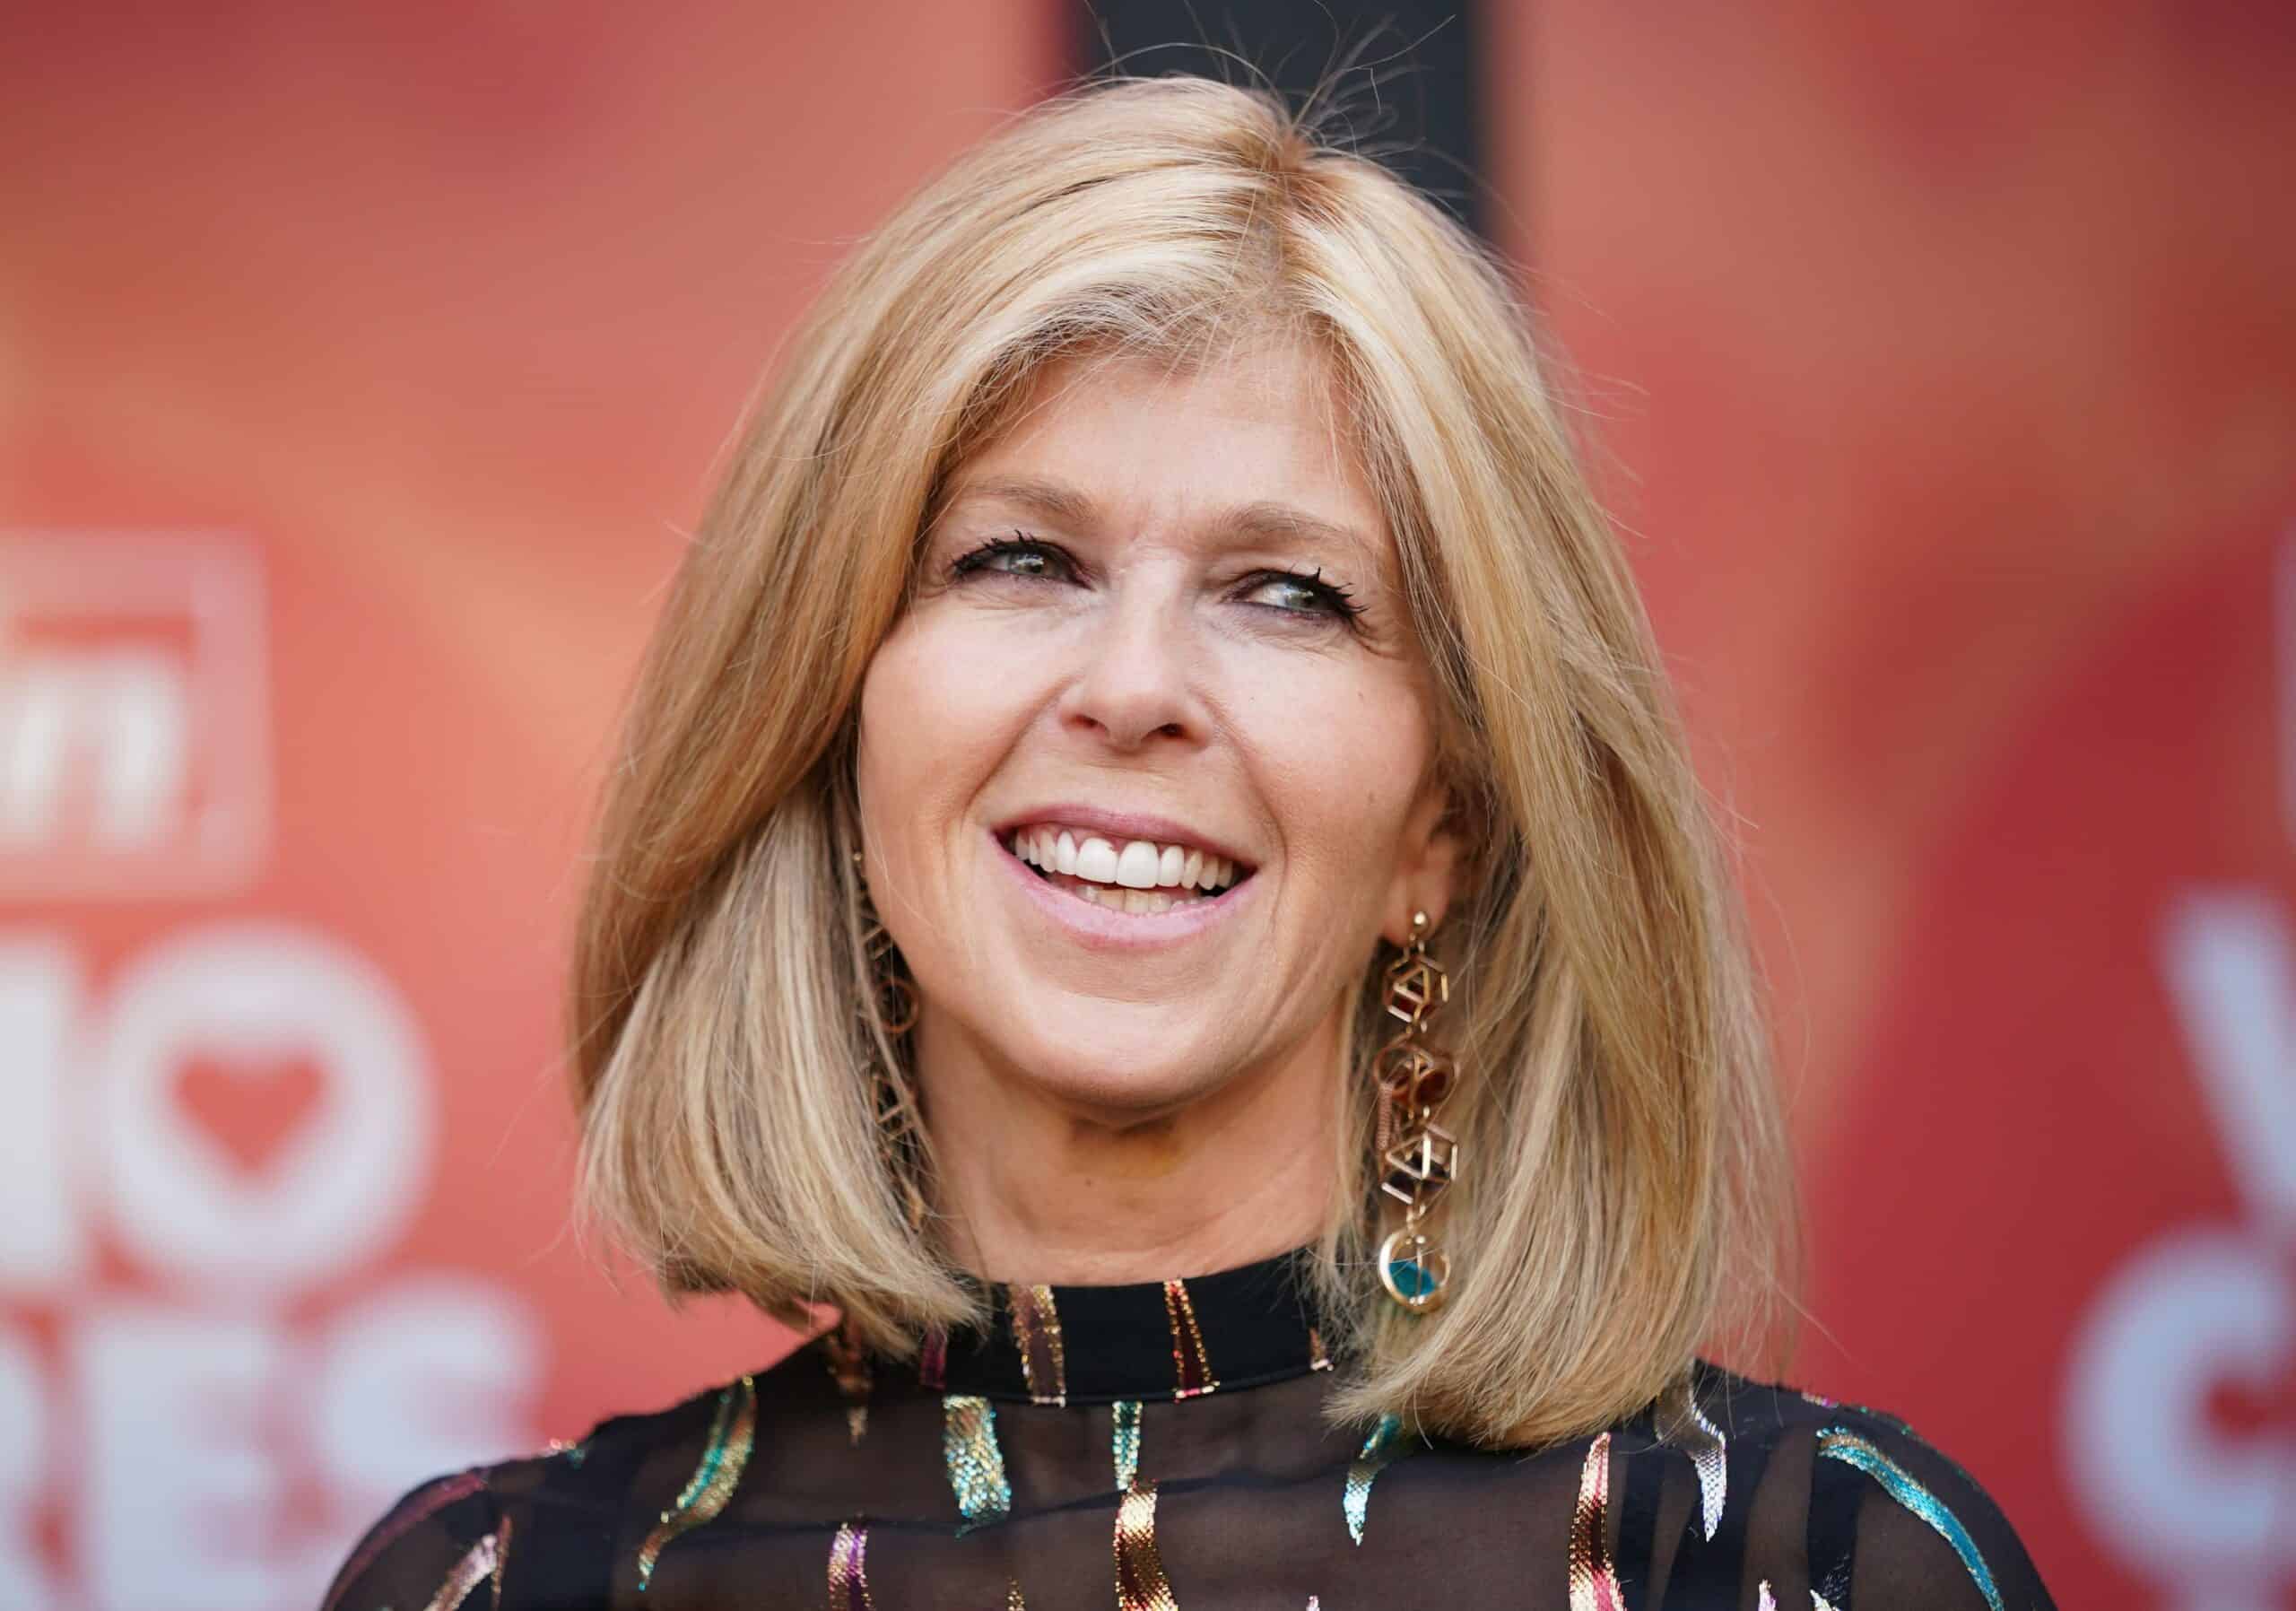 Kate Garraway hailed for shining light on challenges faced by carers